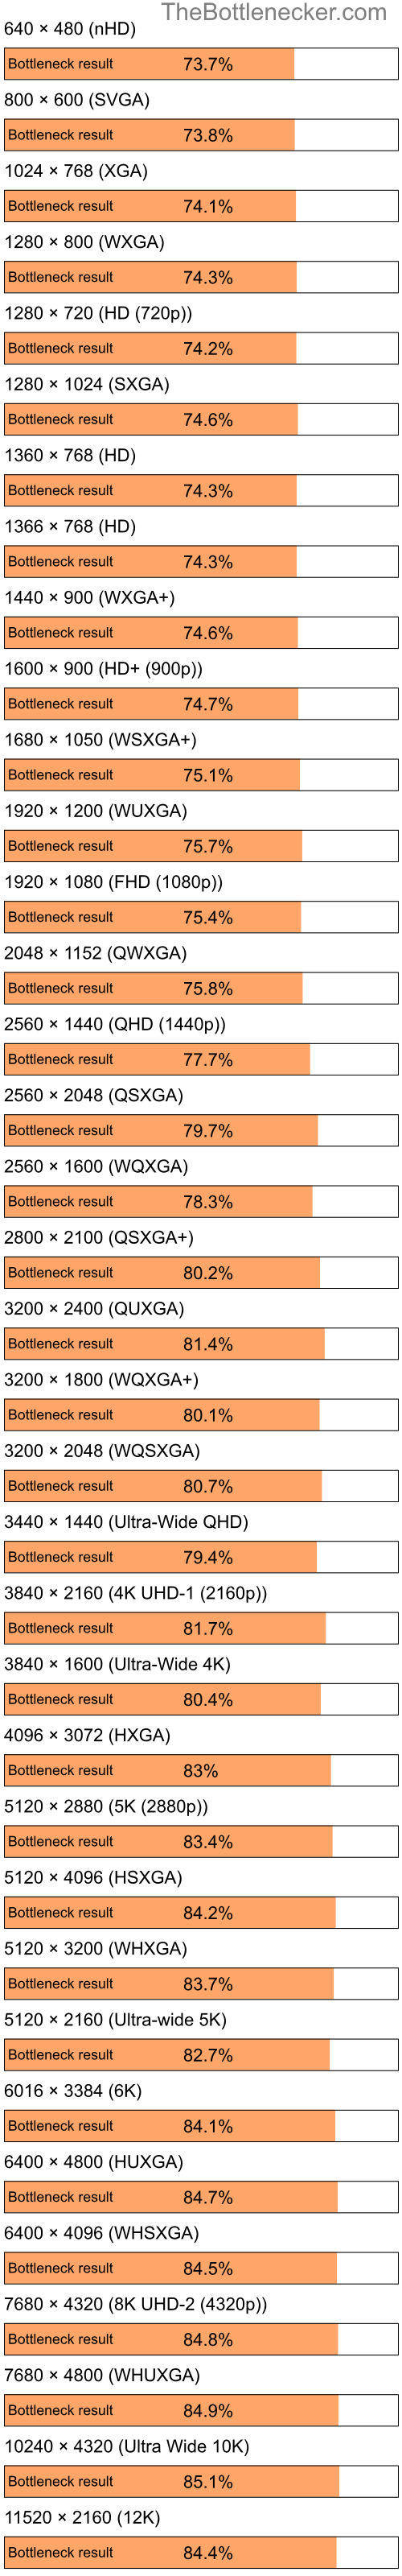 Bottleneck results by resolution for Intel Pentium 4 and NVIDIA GeForce 9100M G in Graphic Card Intense Tasks